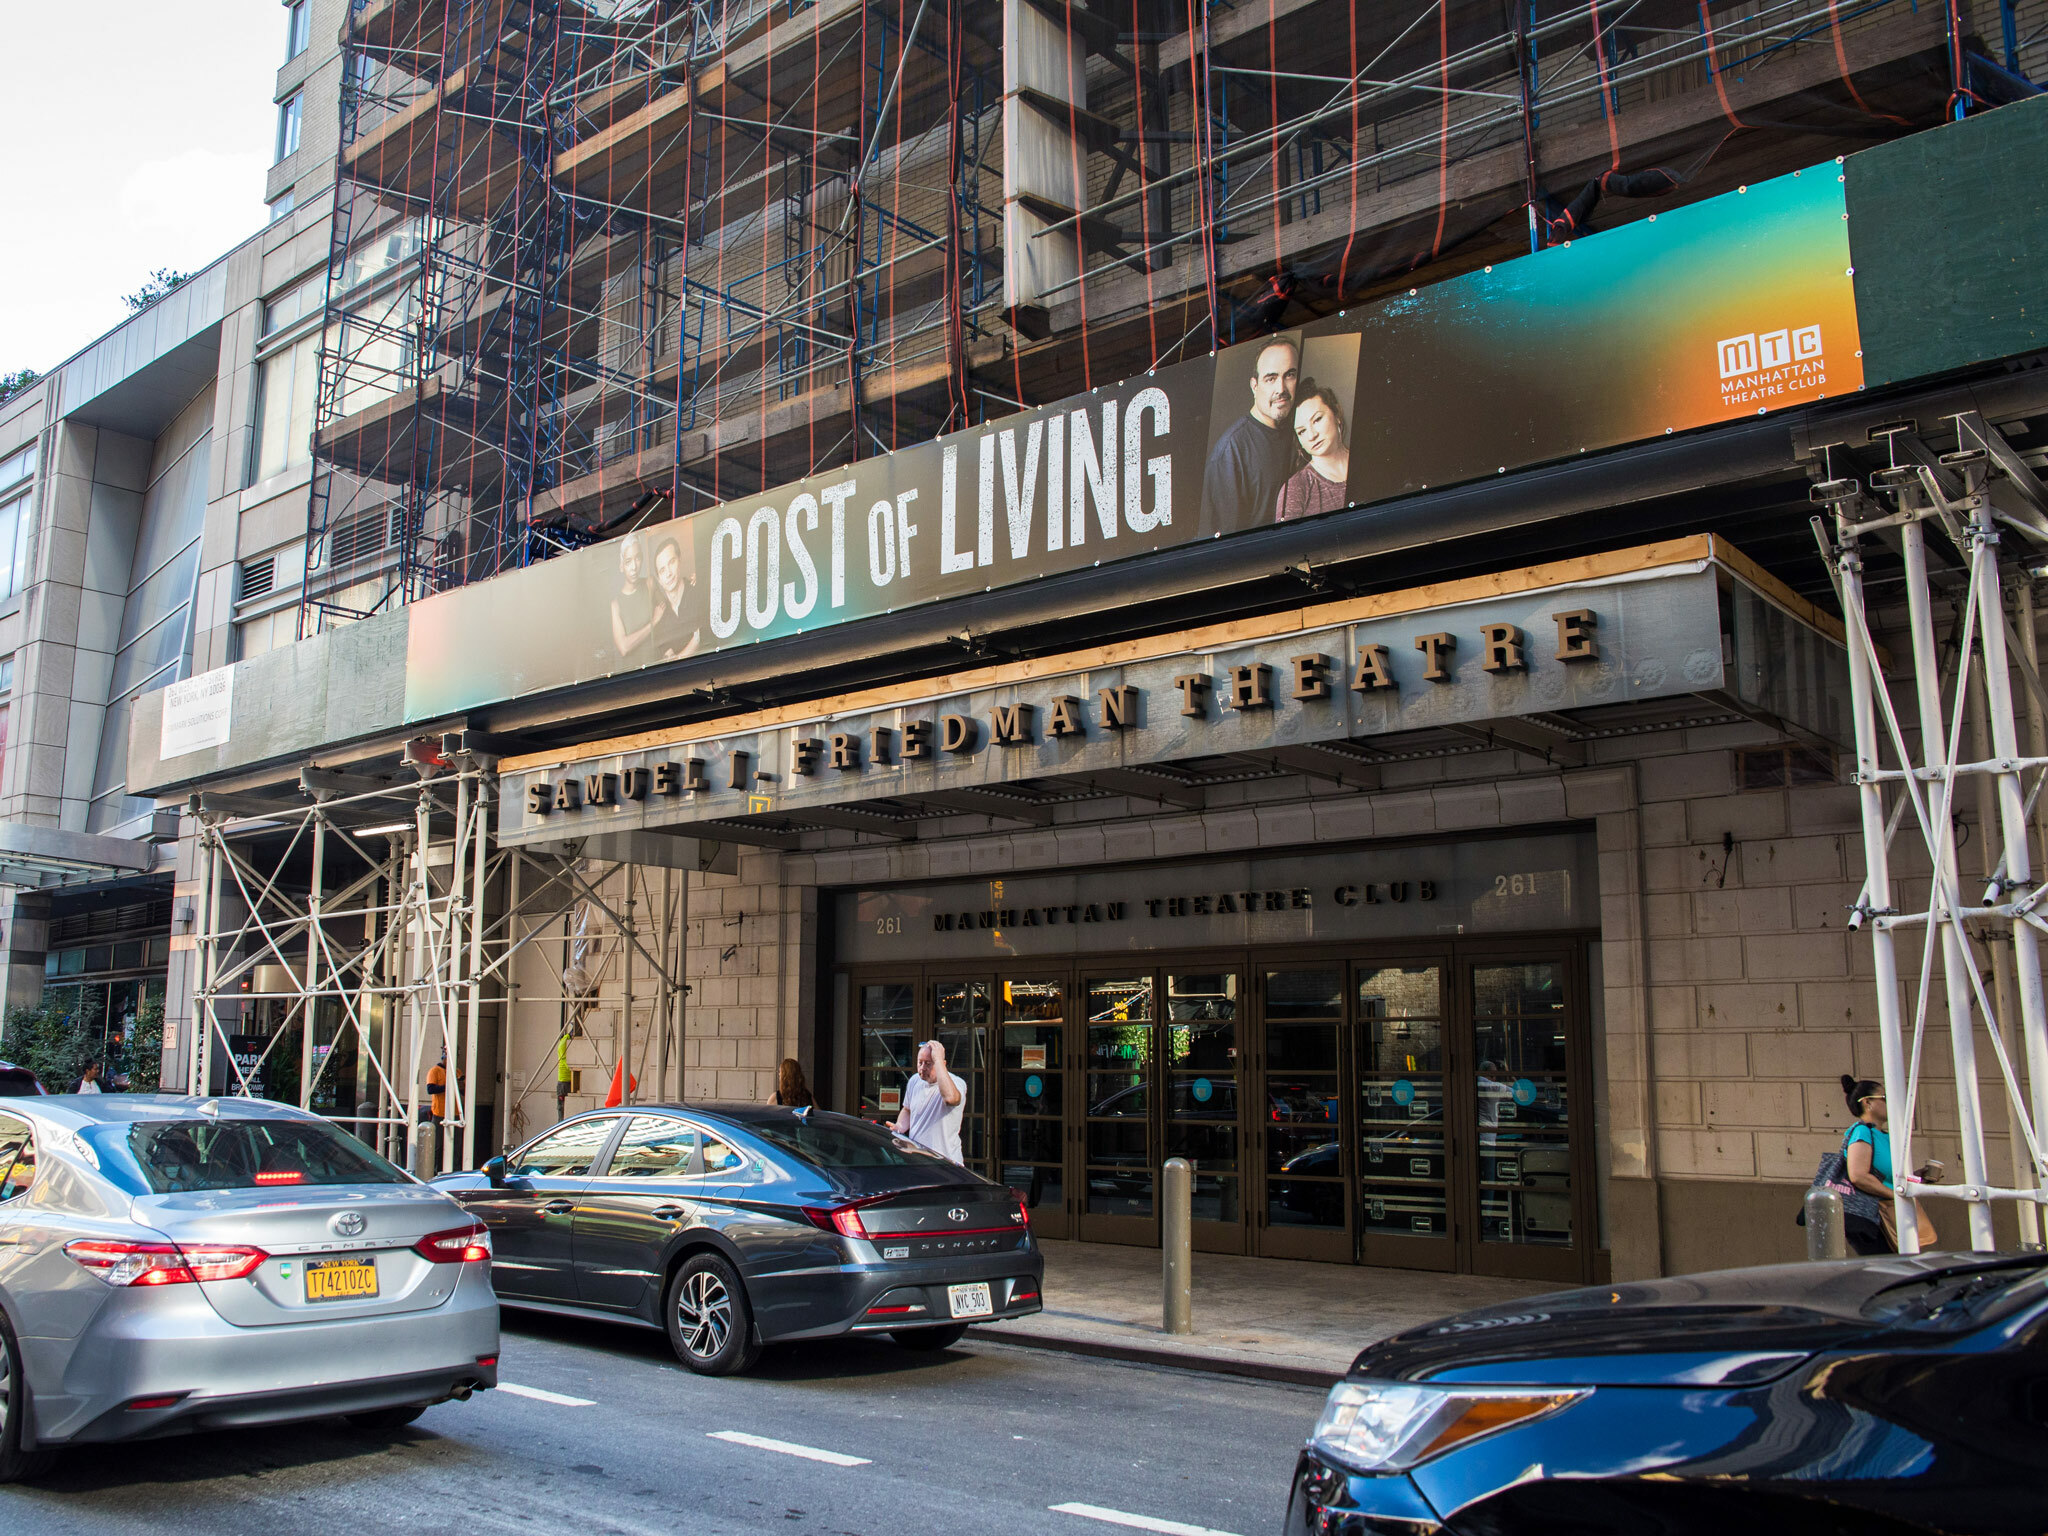 Cost Of Living Broadway Show Marquee at the Samuel J Friedman Theatre in NYC